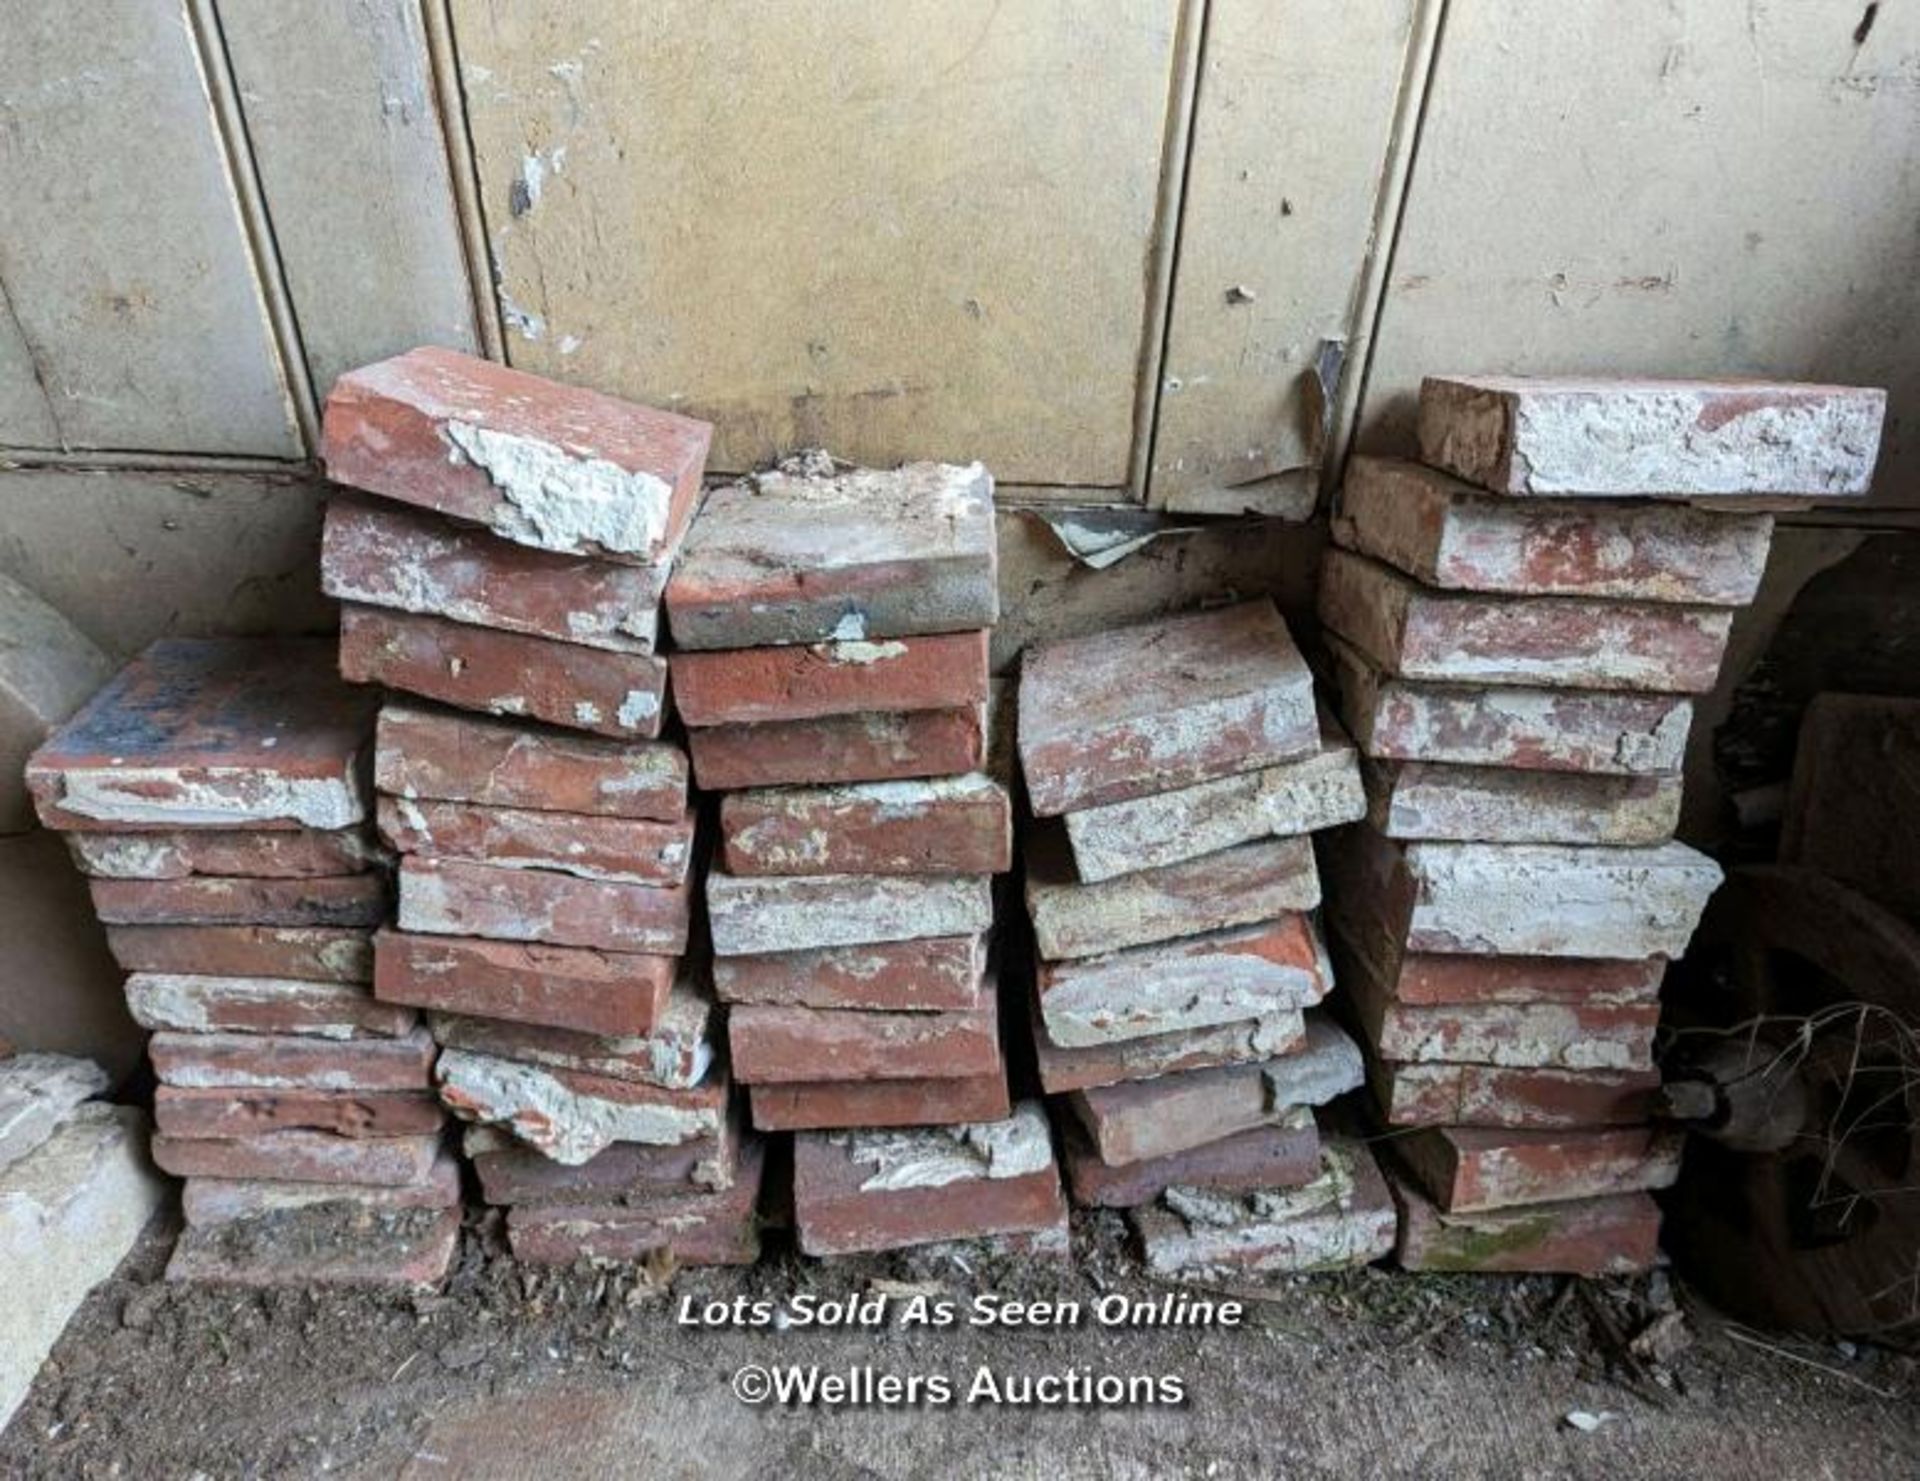 Batch of 49 pavoirs or quarry tiles, thickness from 4-6cm. Approx 18cm x 18cm.